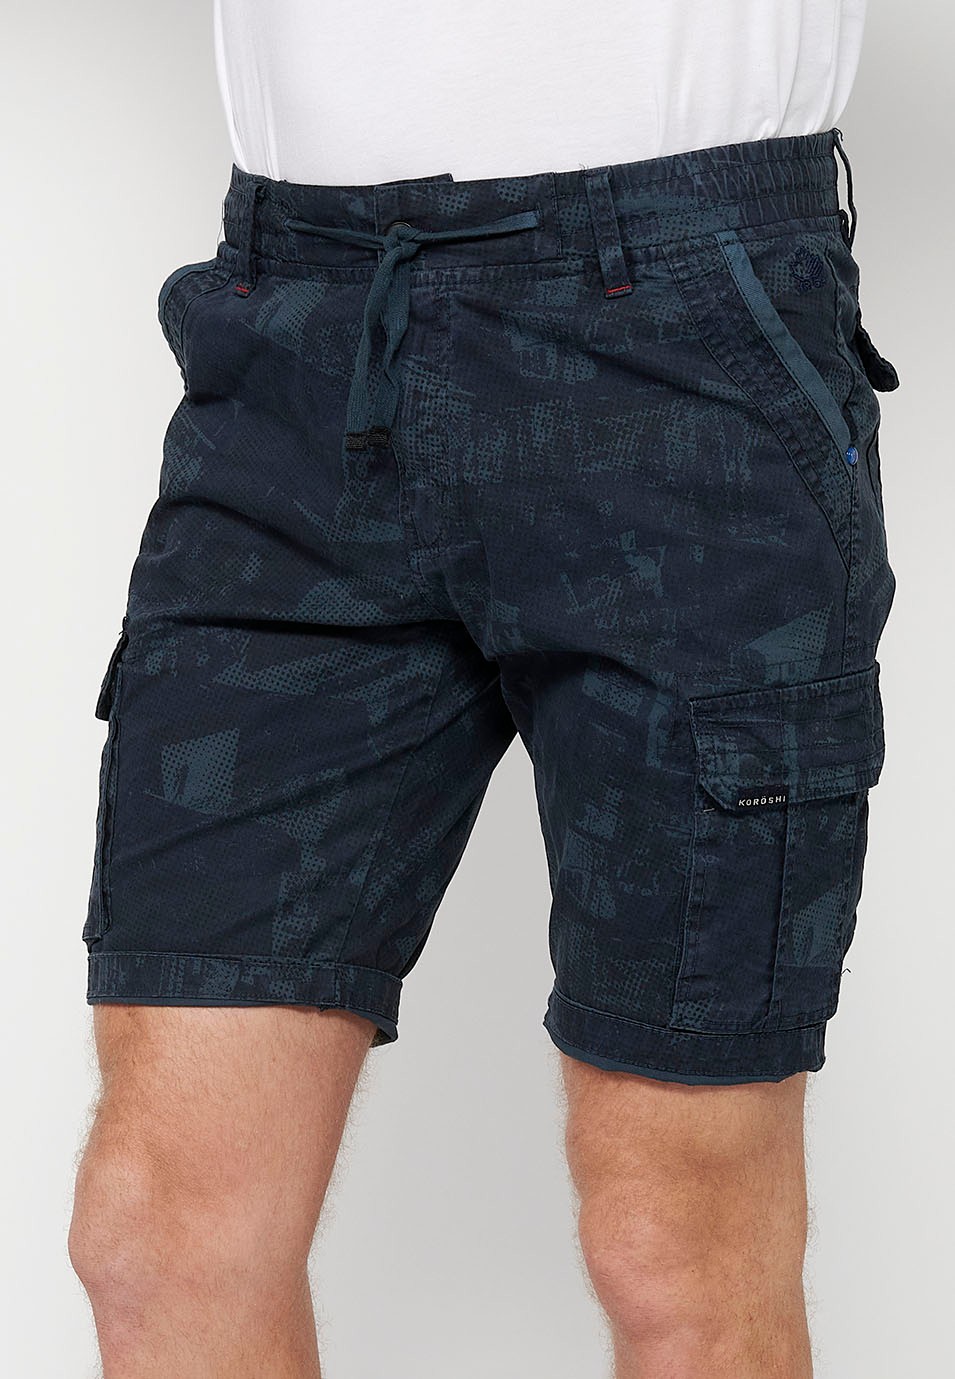 Cargo shorts with front closure with zipper and button and four pockets, two rear pockets with flap with two cargo pockets with flap and adjustable waist with drawstring in Blue for Men 5